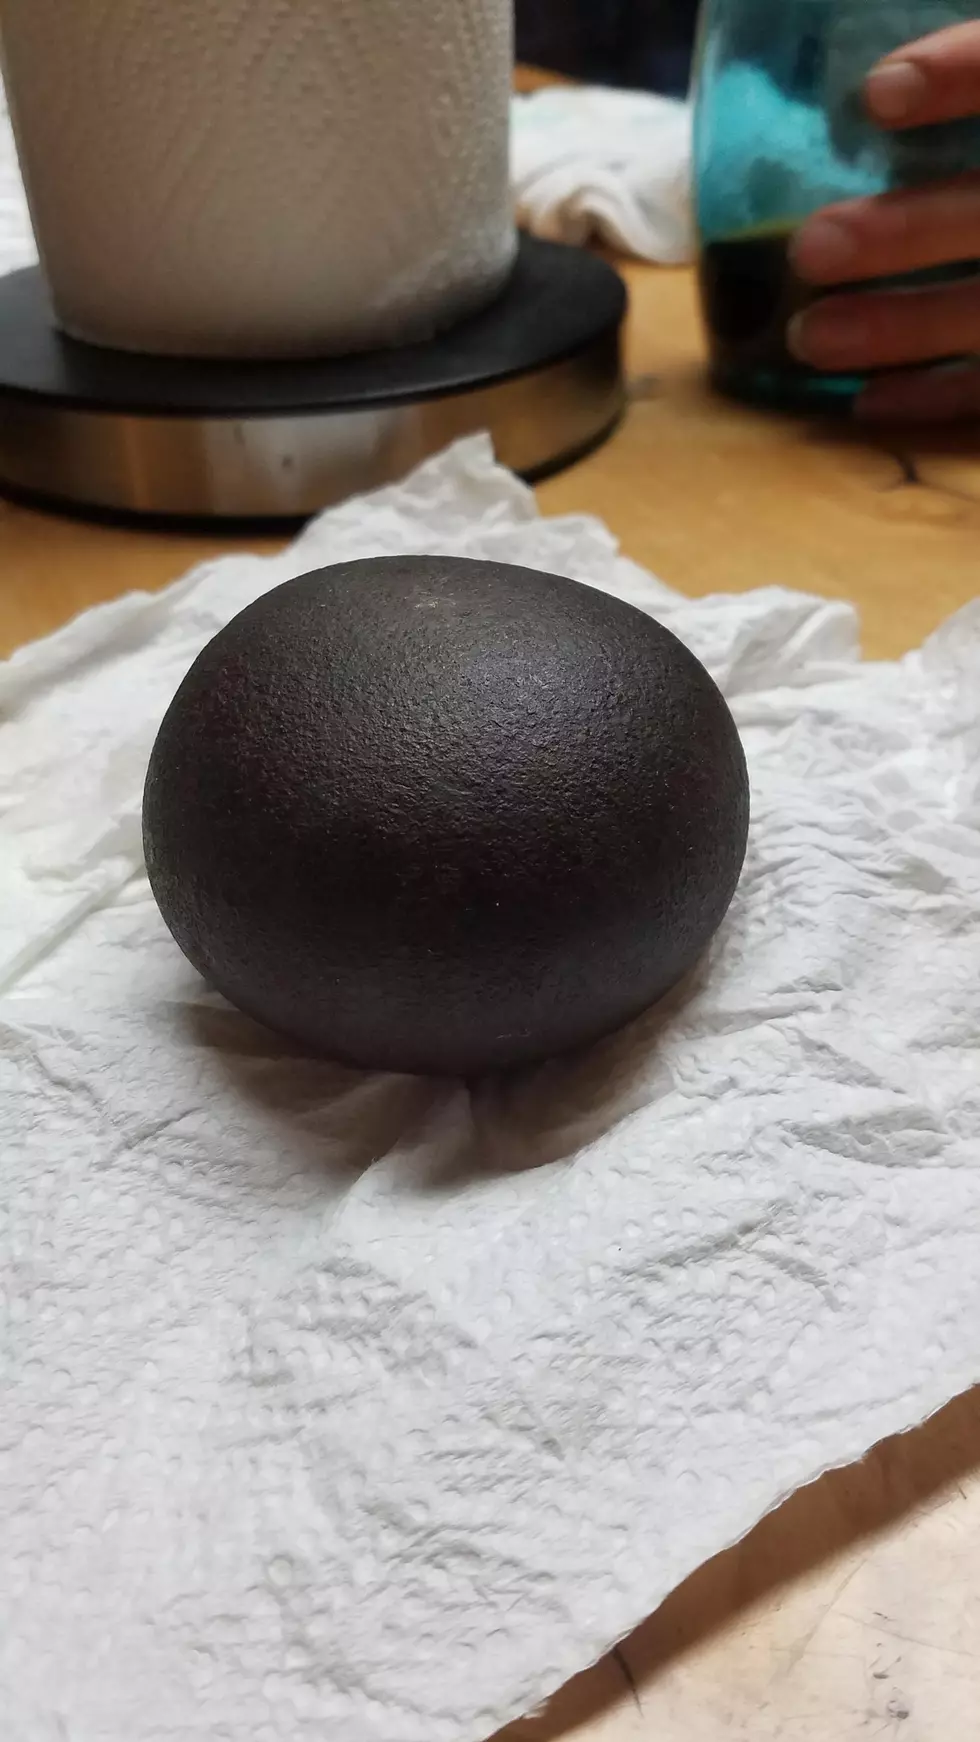 What Is This Odd Looking Ball Found On The Wyo/Utah Border?